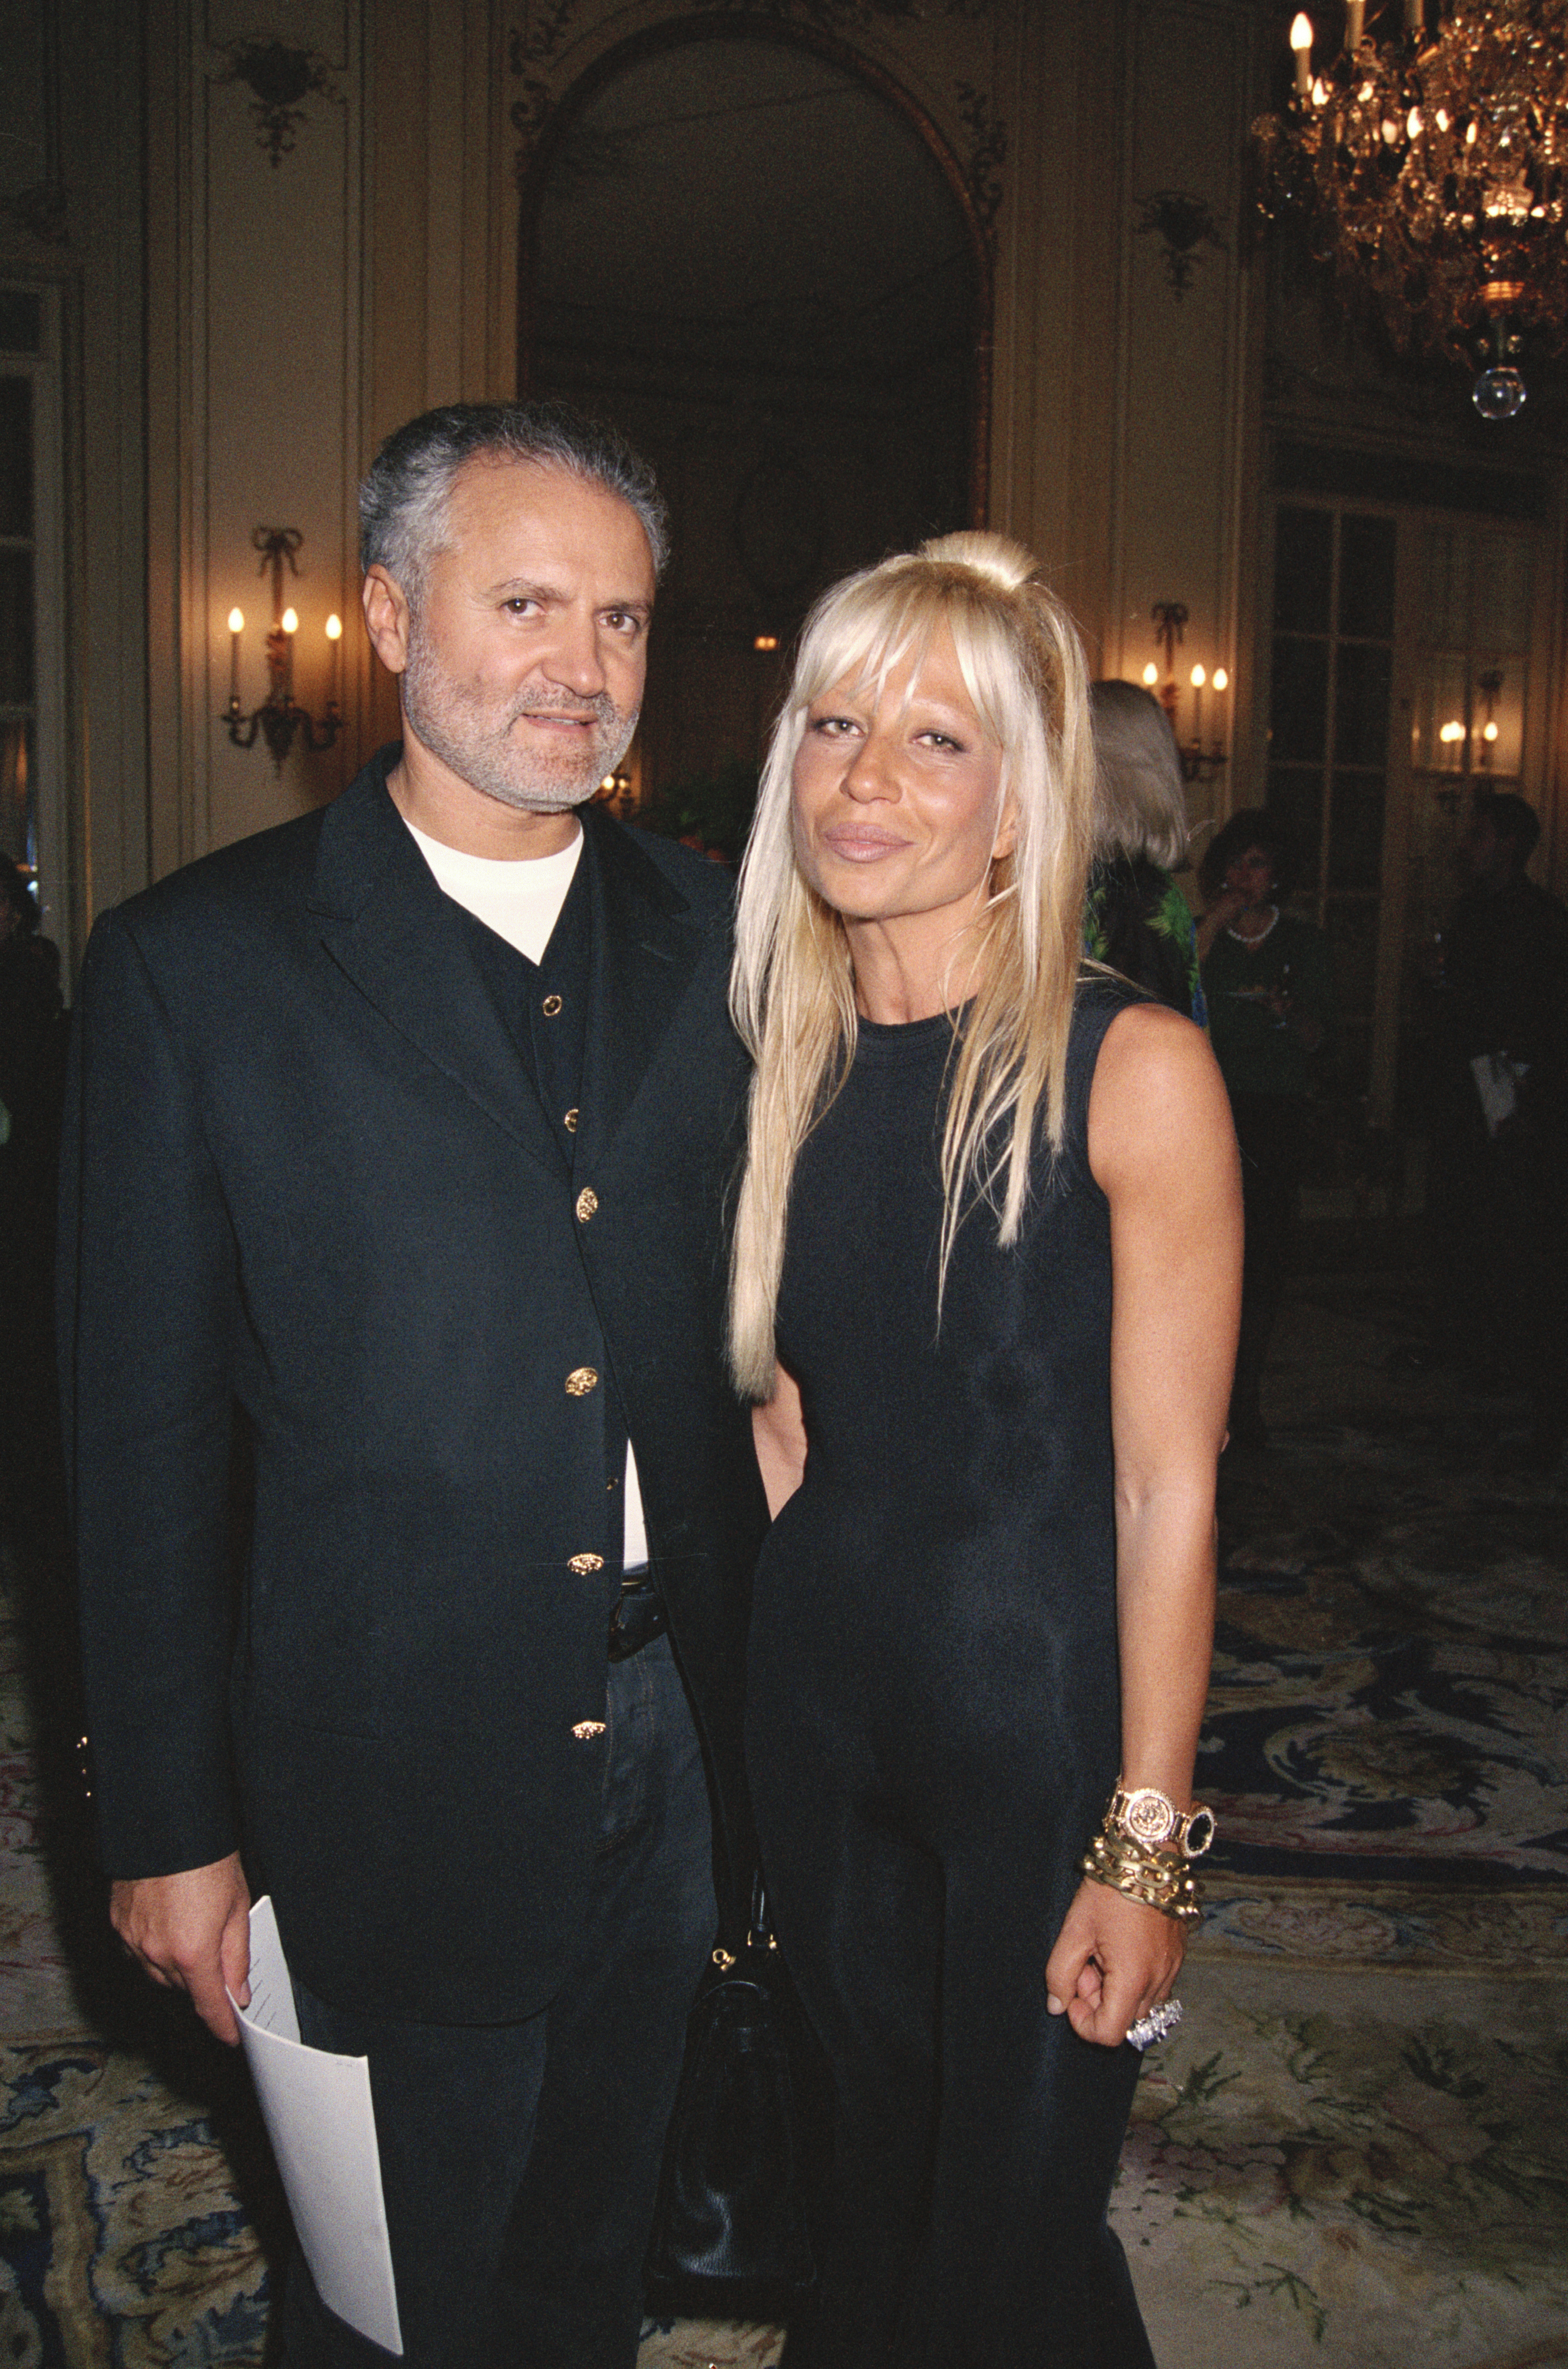 Gianni and Donatella Versace at a Versace fashion show in Paris, France on January 23, 1993 | Source: Getty Images